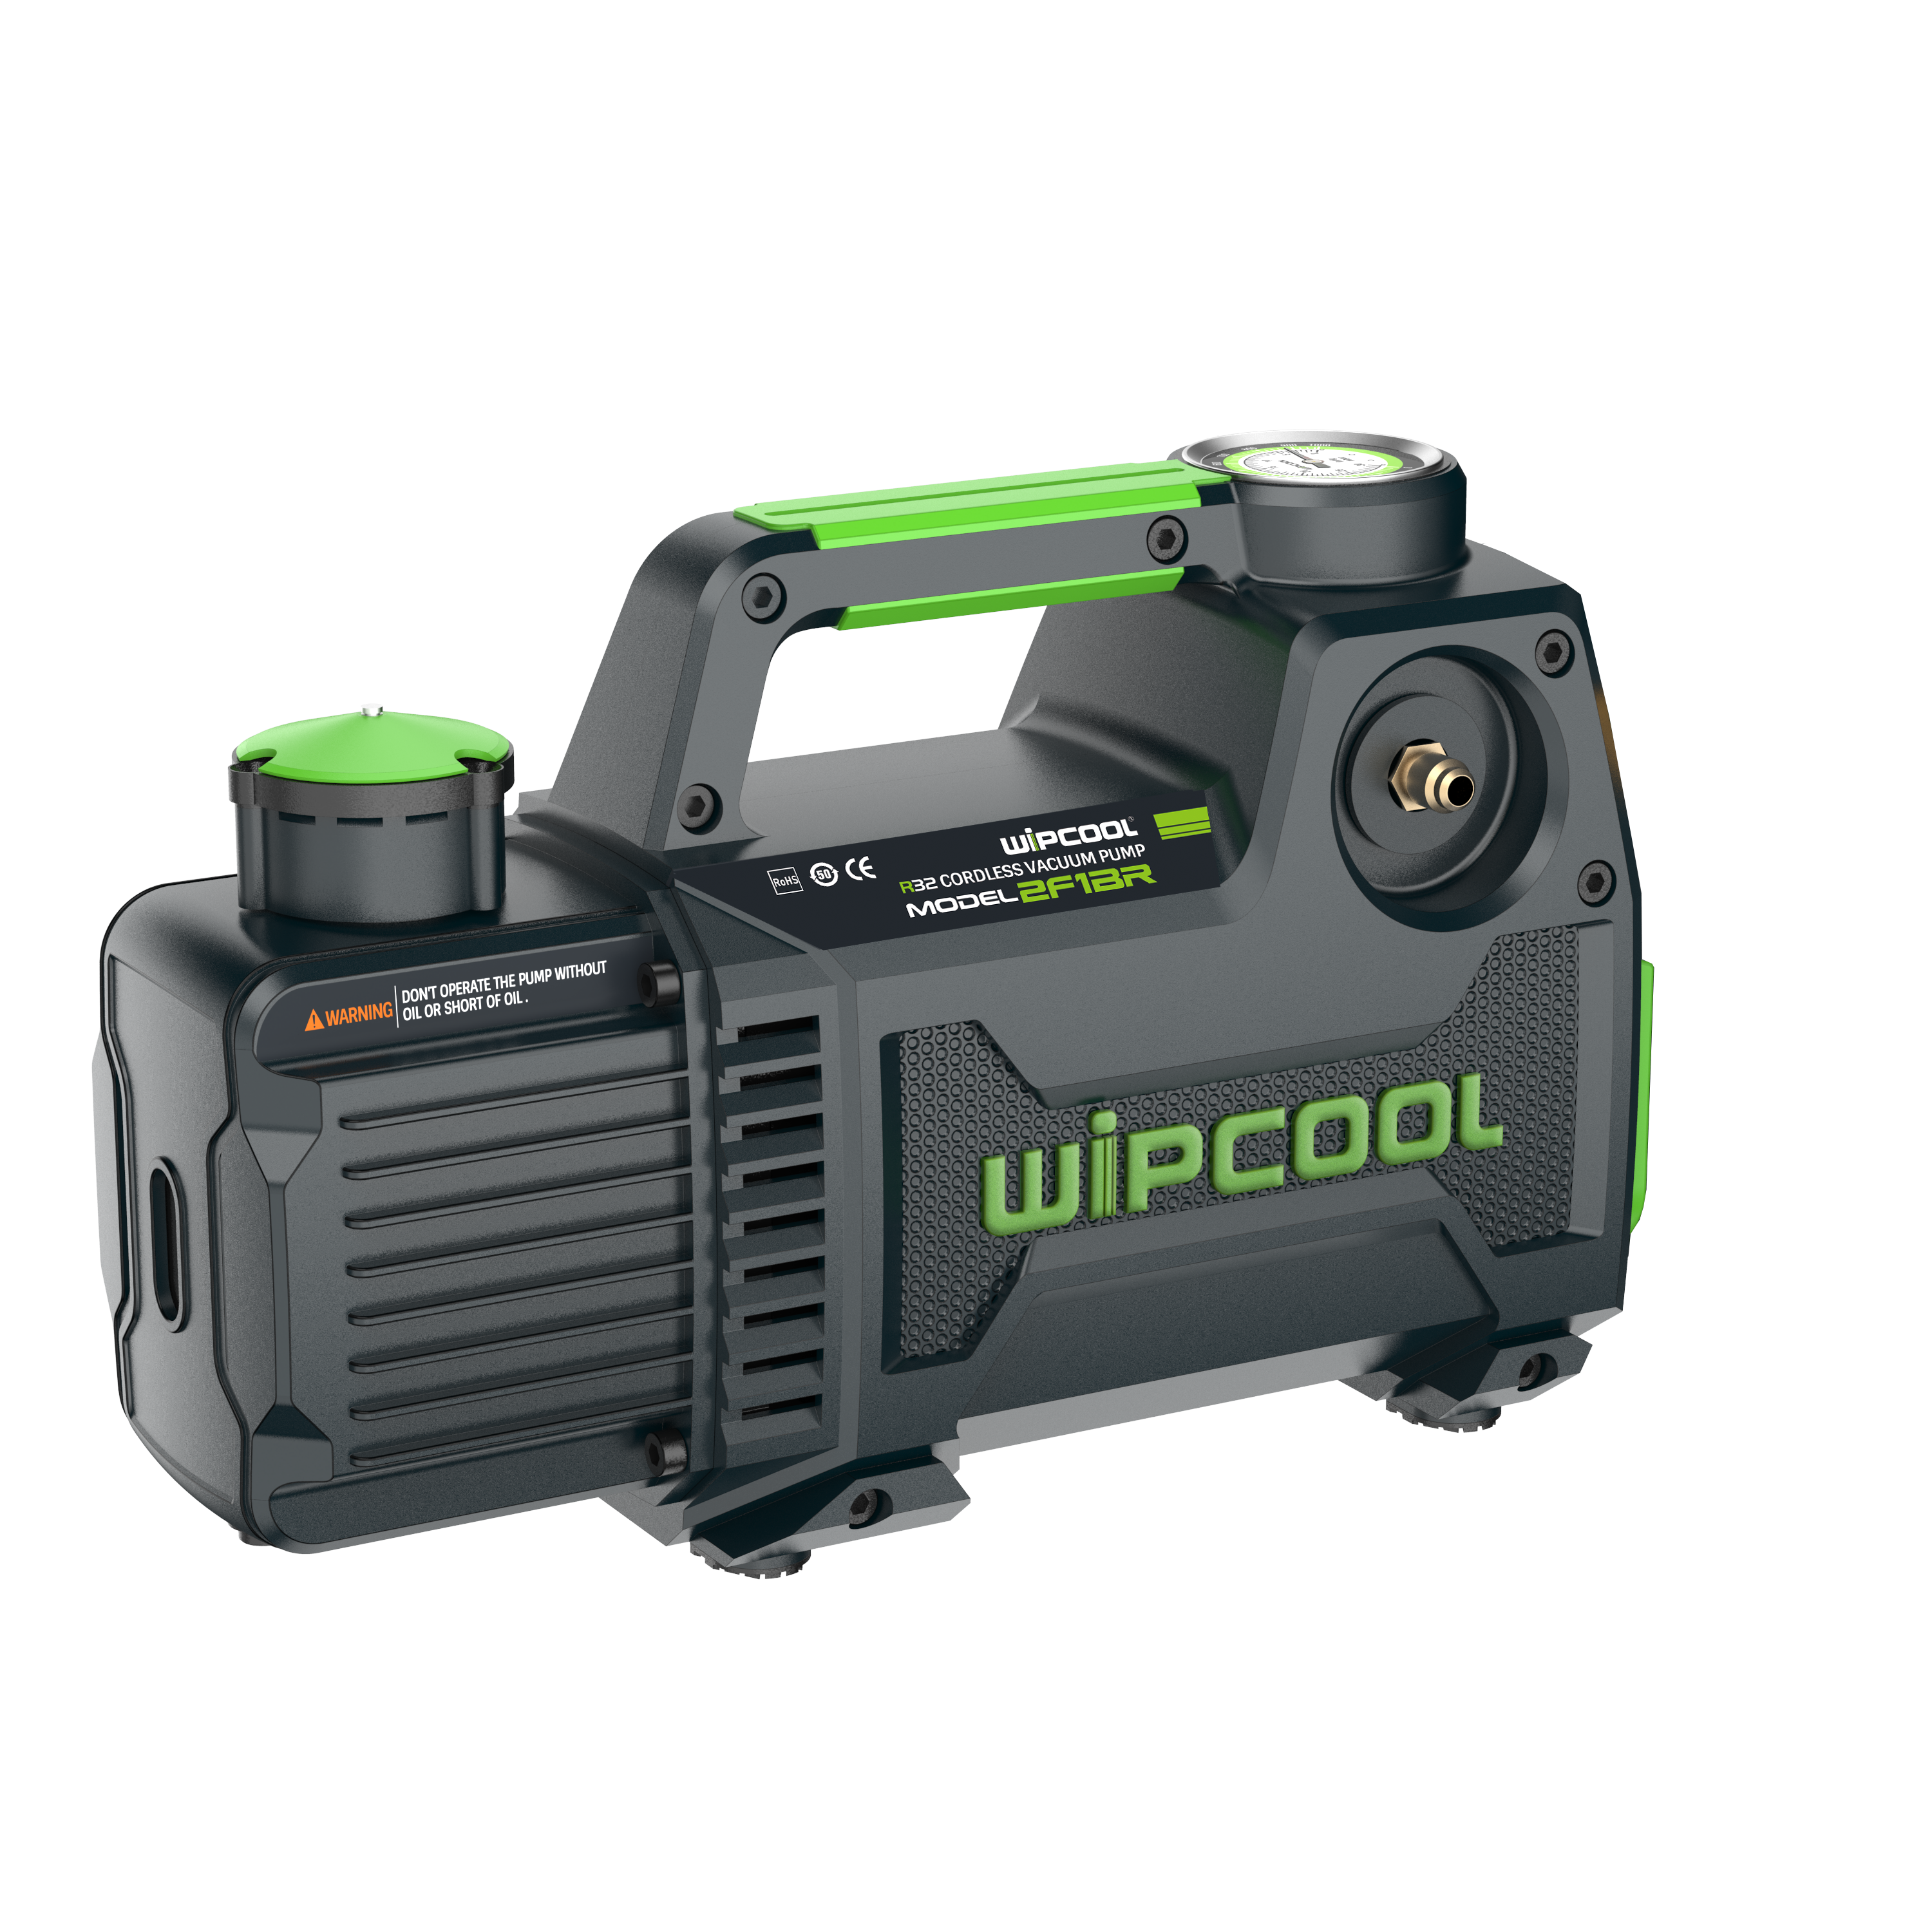 WIPCOOL Cordless Series, 70 L/min, 2-stage Vacuum Pump - R32 Compliant (Pump Only)